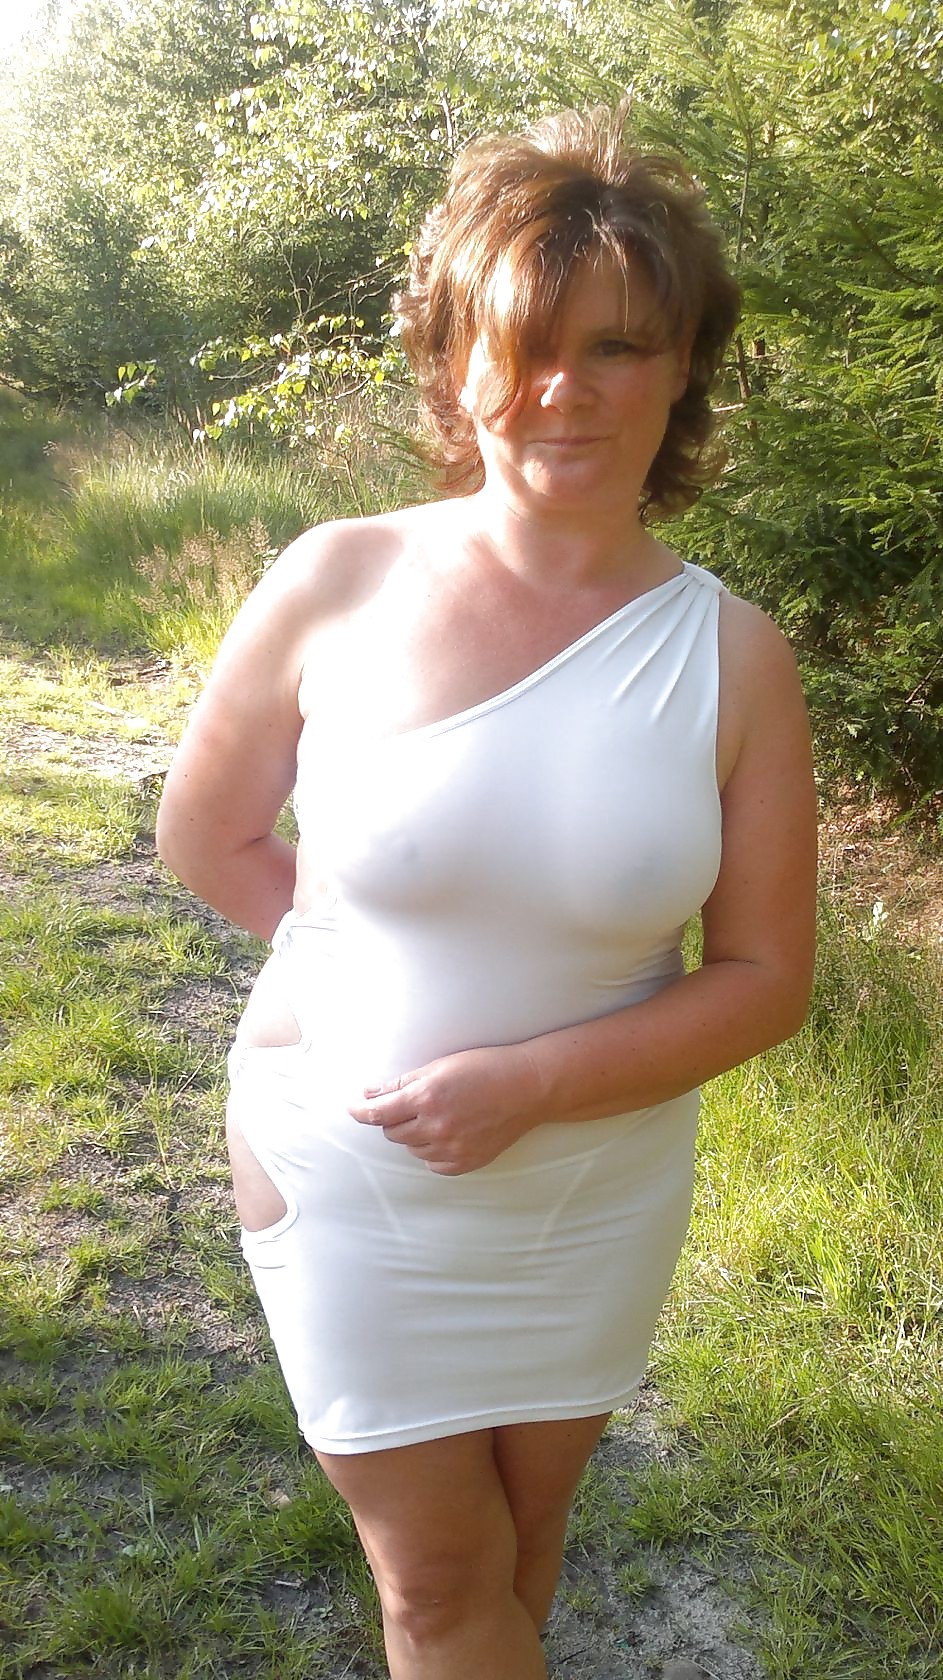 Milfs - Dressed And Sexy 4 - 48 Pics - xHamster.com